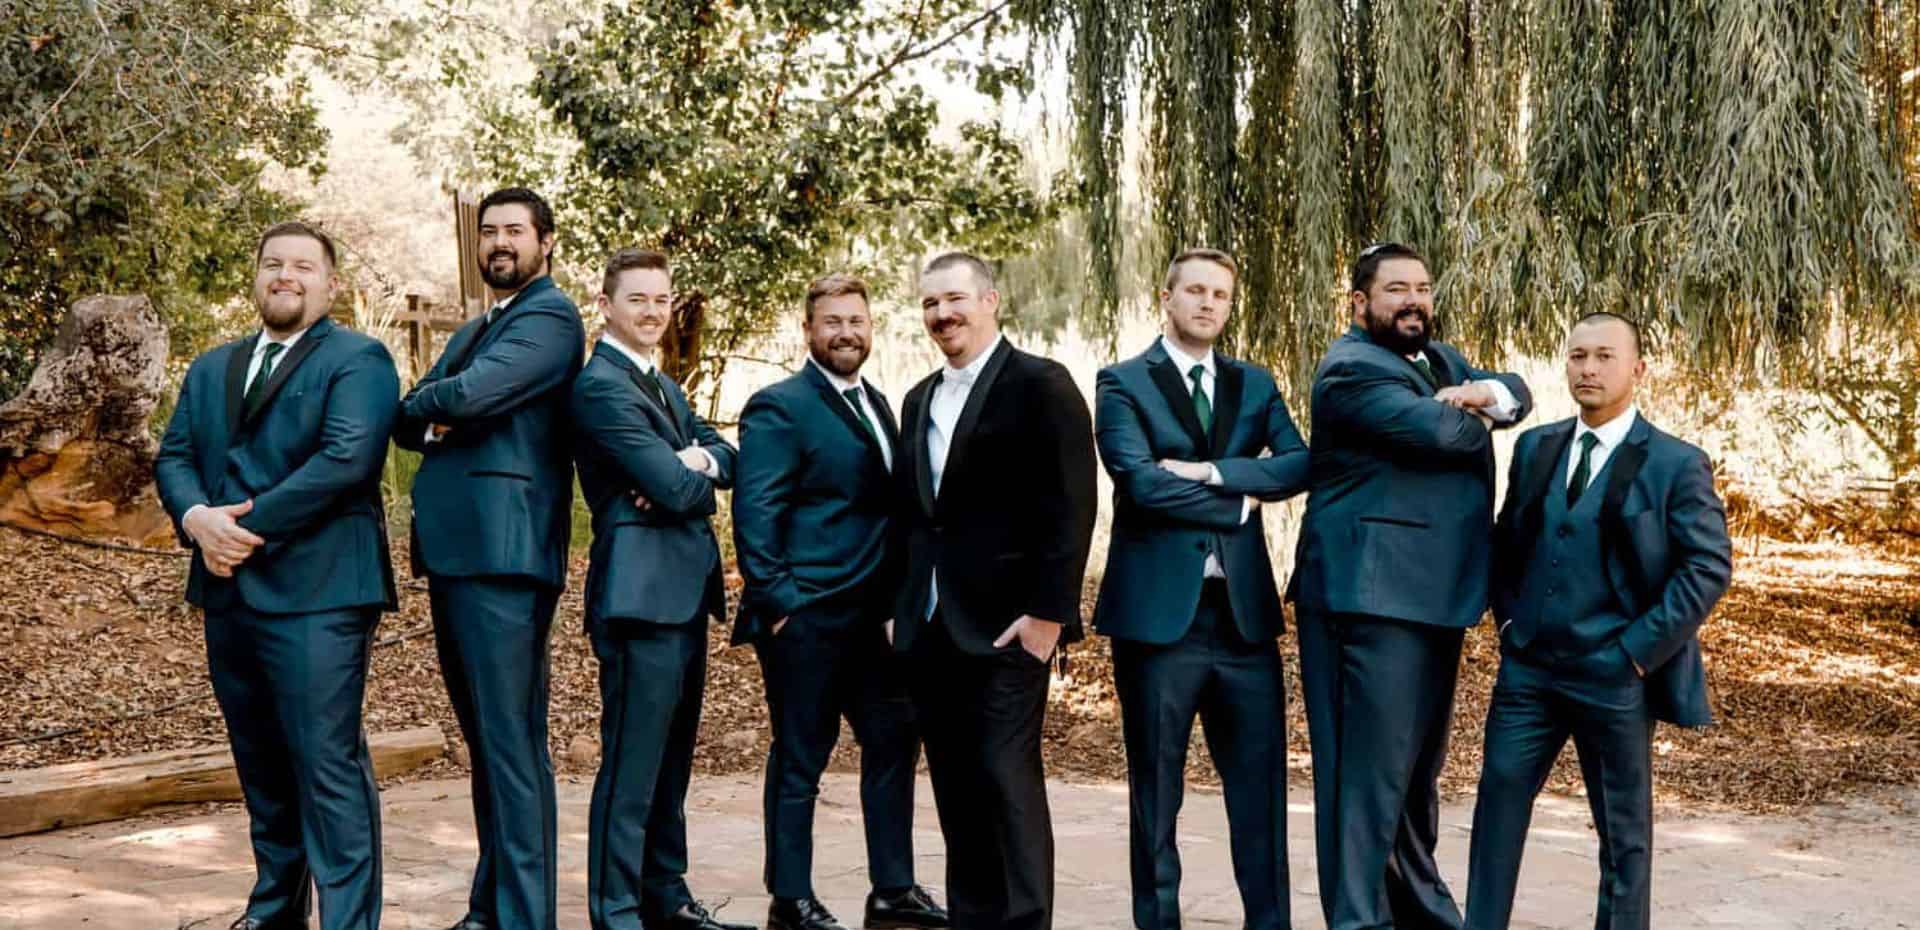 A group of groomsmen posing for a photo.